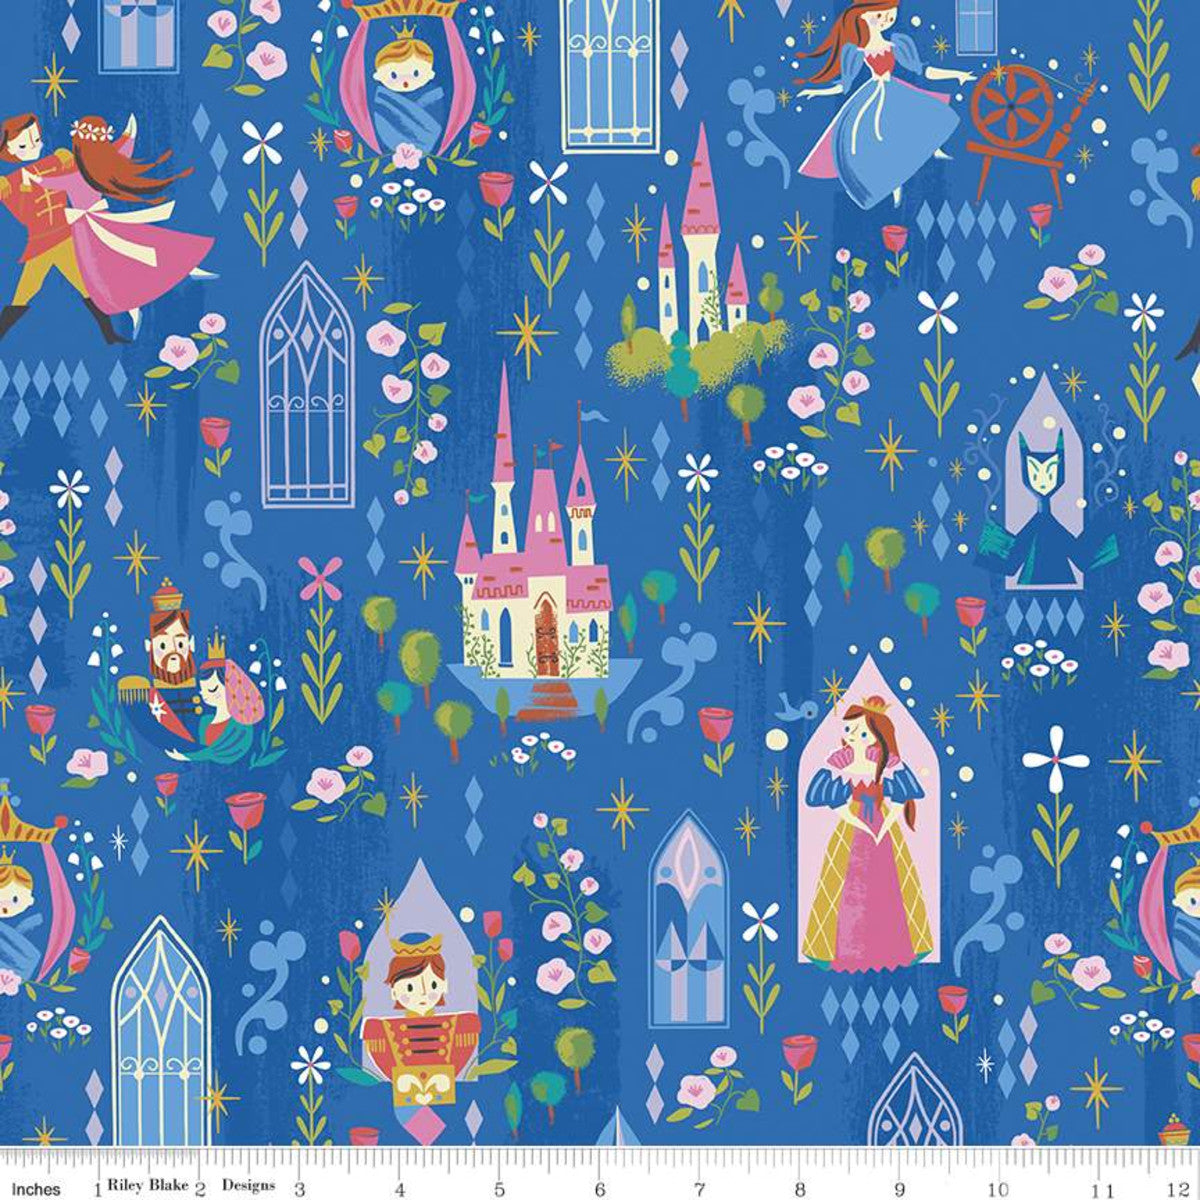 Manufacturer: Riley Blake Designs Designer: Jill Howarth Collection: Little Brier Rose Print Name: Main in Midnight Sparkle Material: 100% Cotton  Weight: Quilting  SKU: SC11070-MIDNIGHT Width: 44 inches